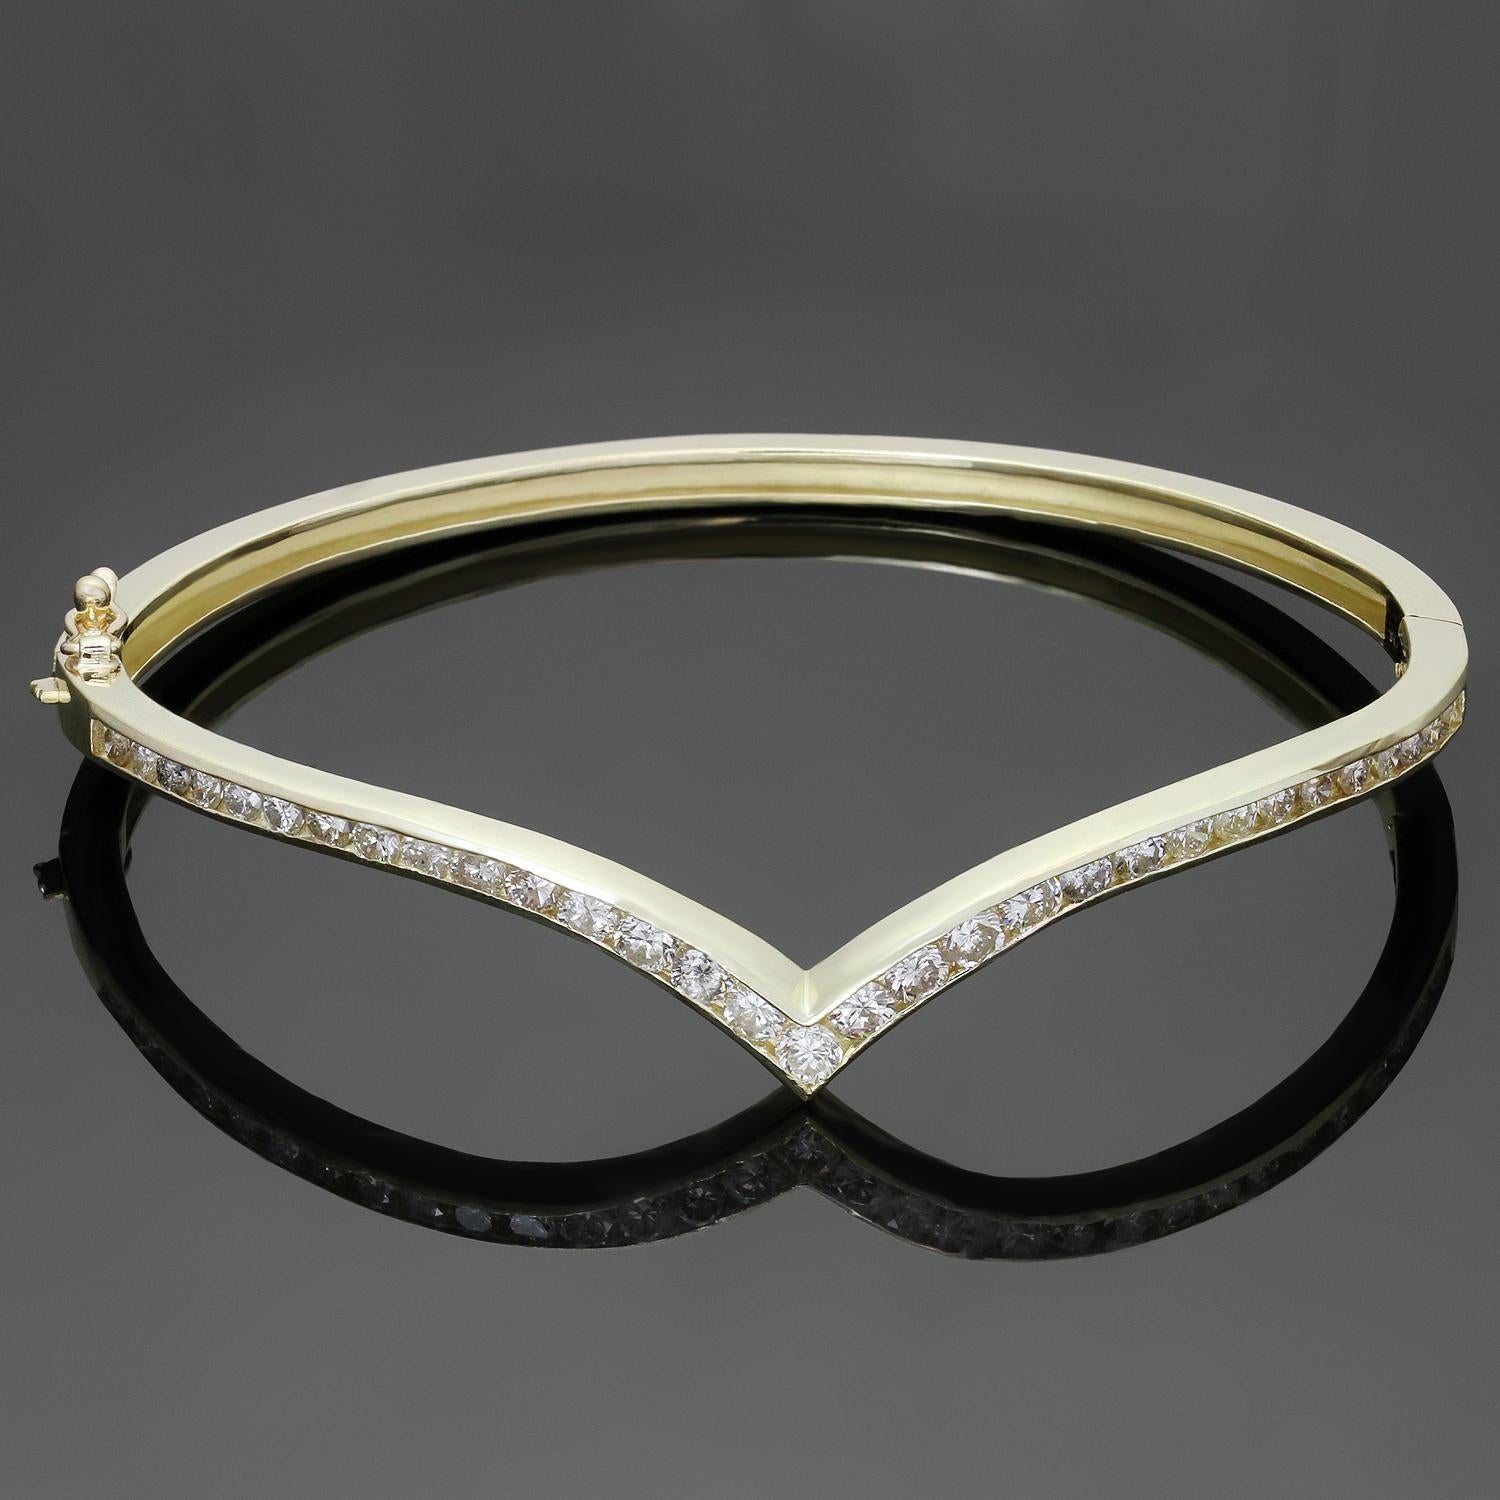 This classic vintage V-shaped bangle bracelet is crafted in 14k yellow gold and set with brilliant-cut round diamonds. Made in United States circa 1980s. Measurements: 0.15